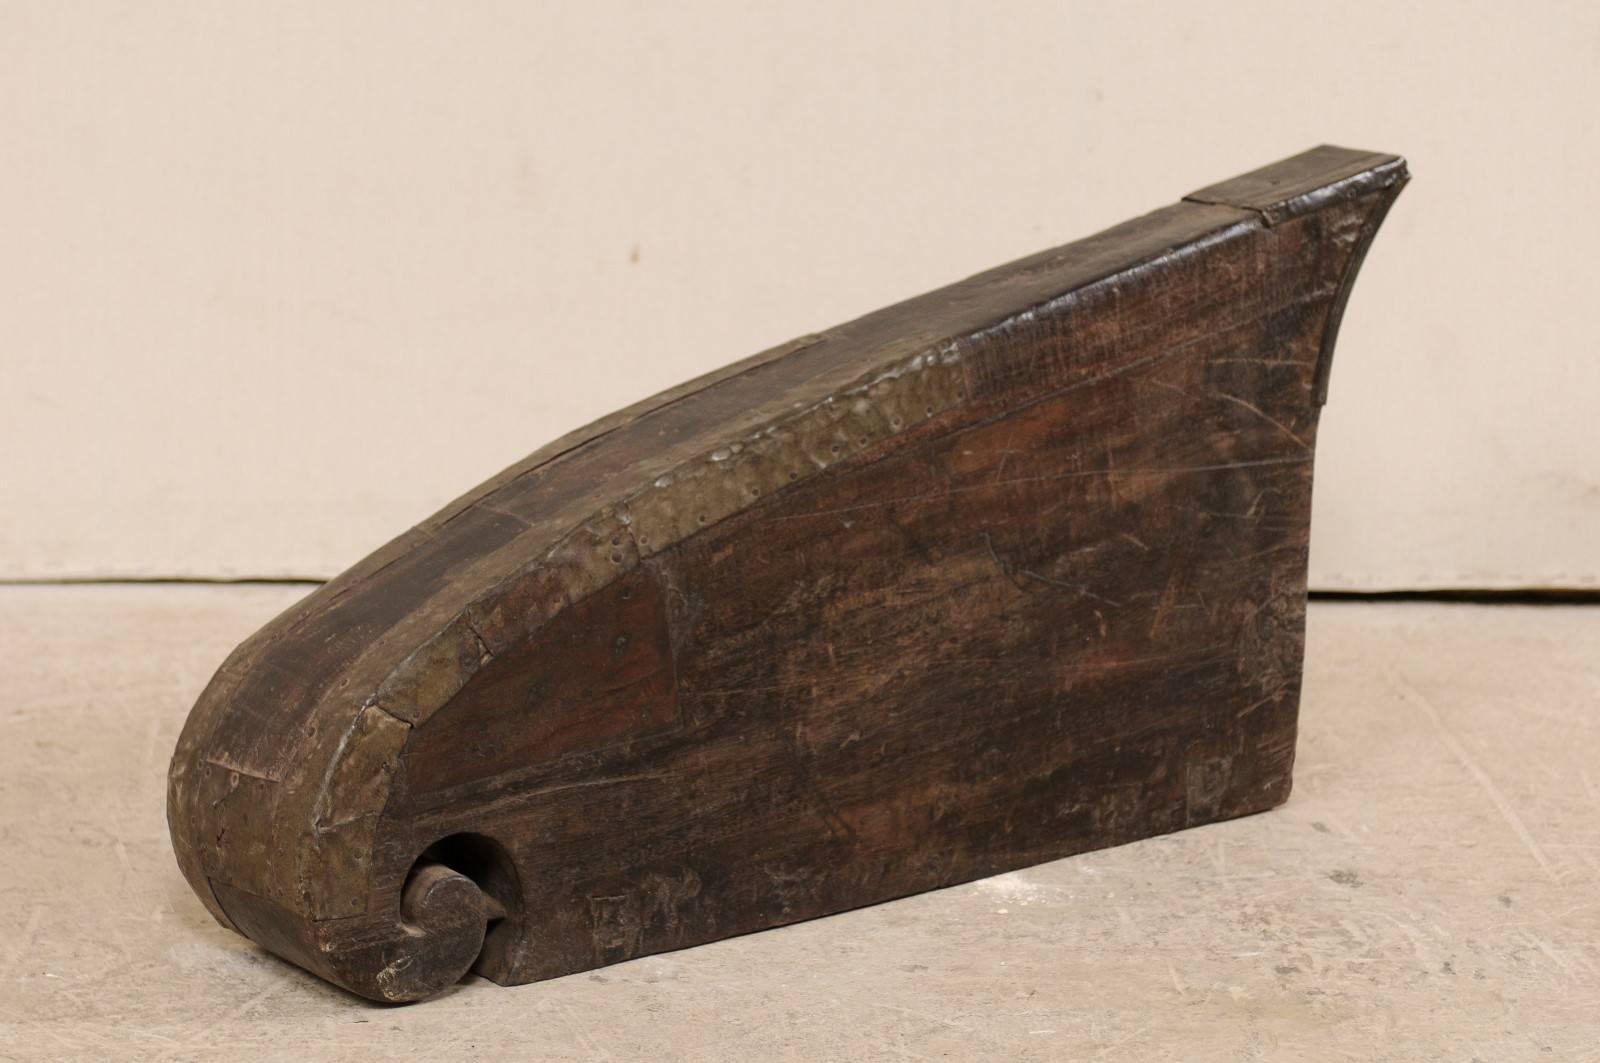 A South Indian (Kerala) wooden boat prow from the mid-20th century. This hand-carved boat prow from Kerala is adorn with curling volute and cut metal banding accented along it's top sides, which has a beautiful salt water patina. These raised prows